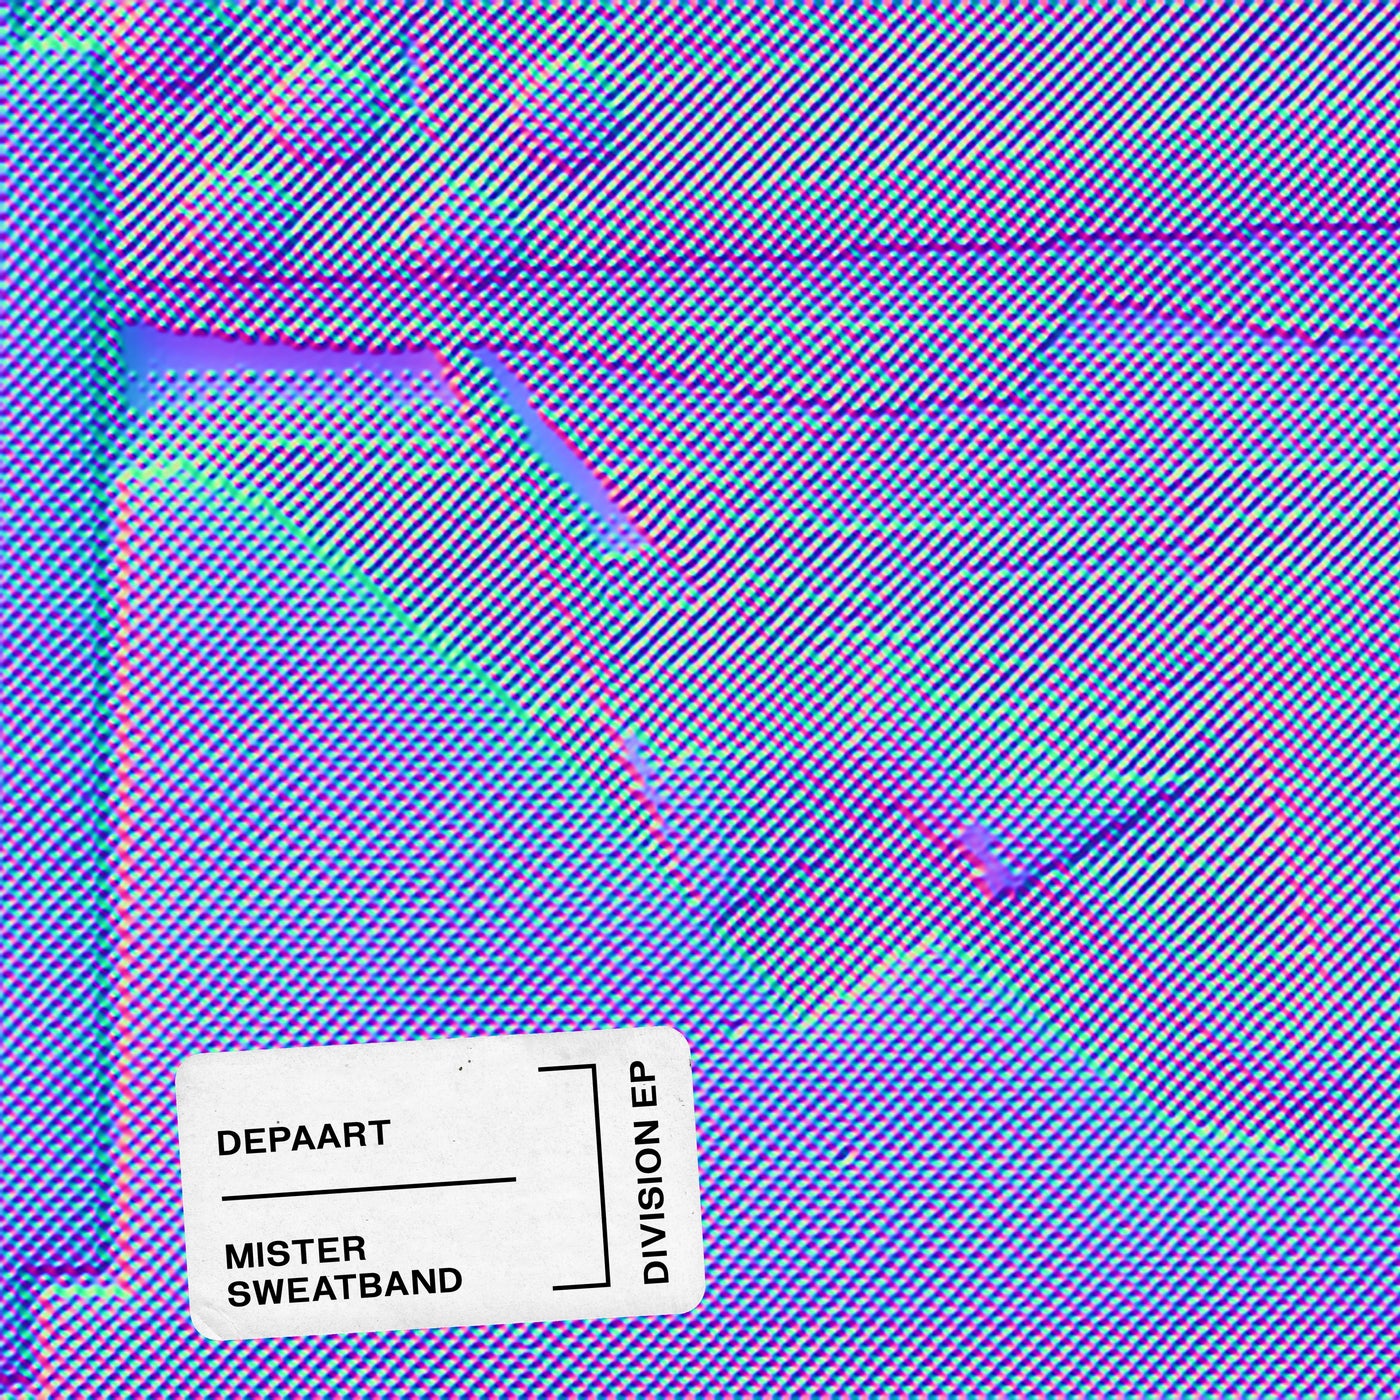 image cover: Mister Sweatband, Depaart - Division EP / DIYNAMIC133